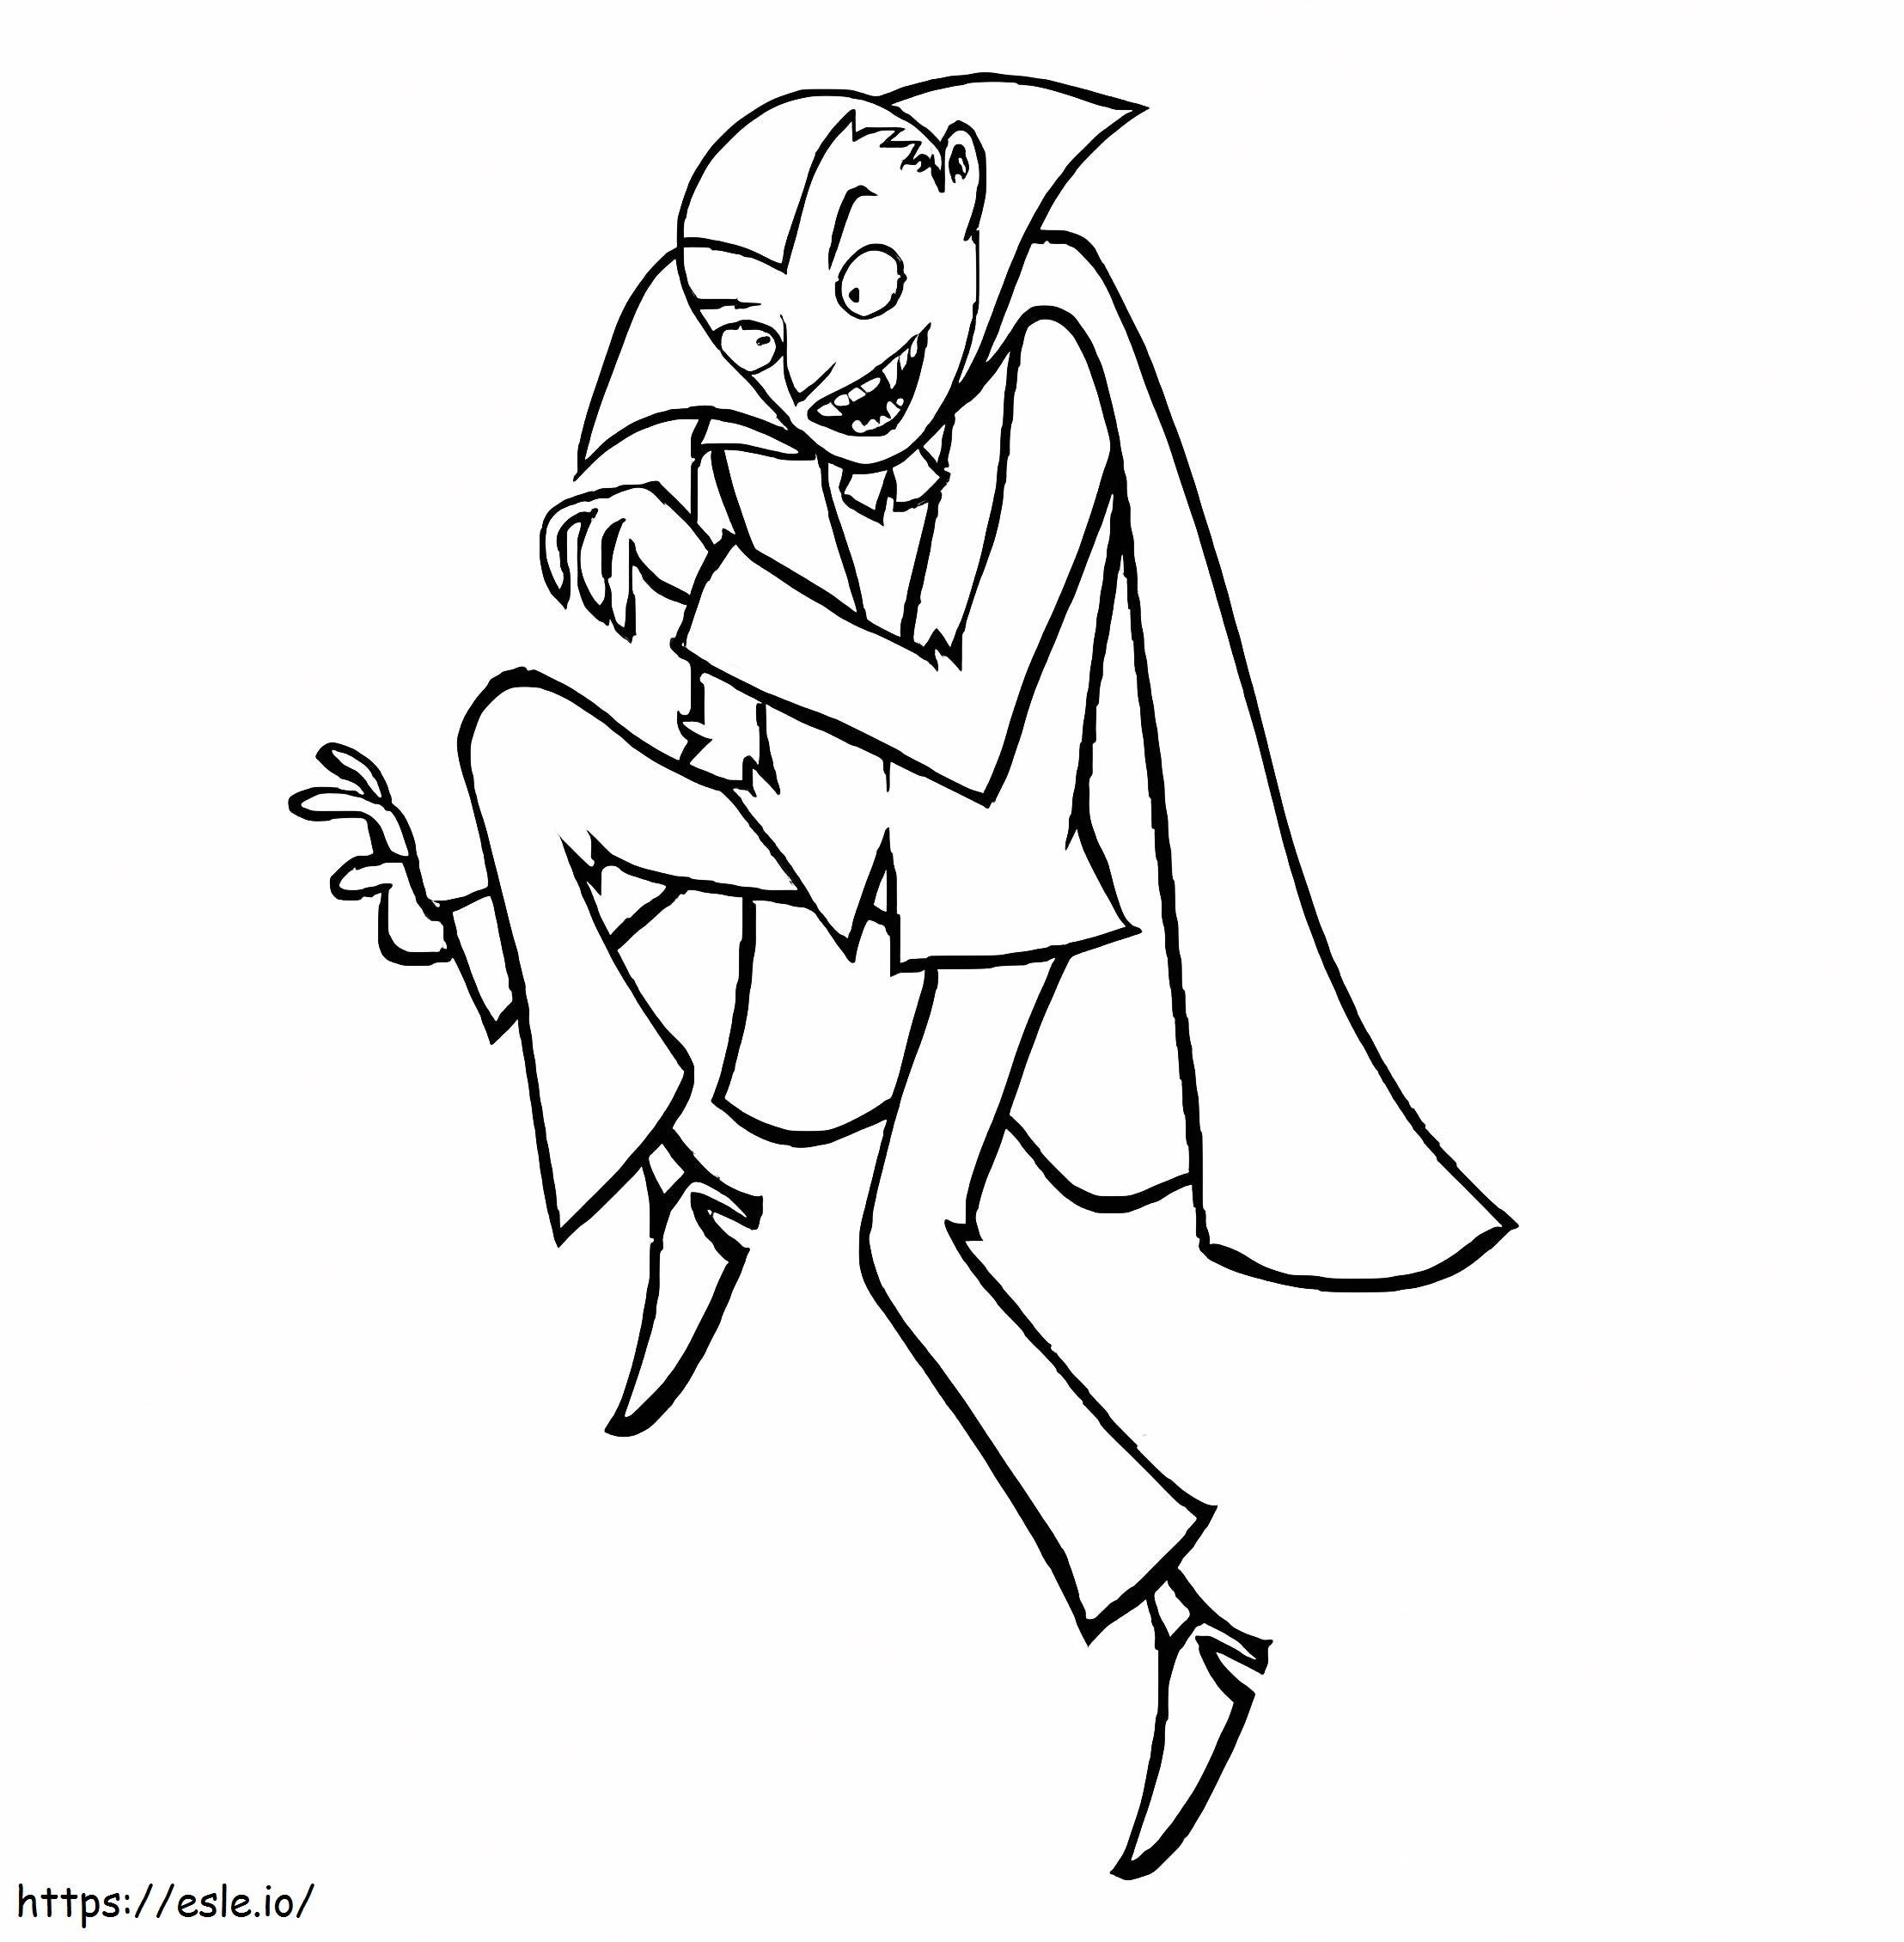 Dracula Walks Gently coloring page